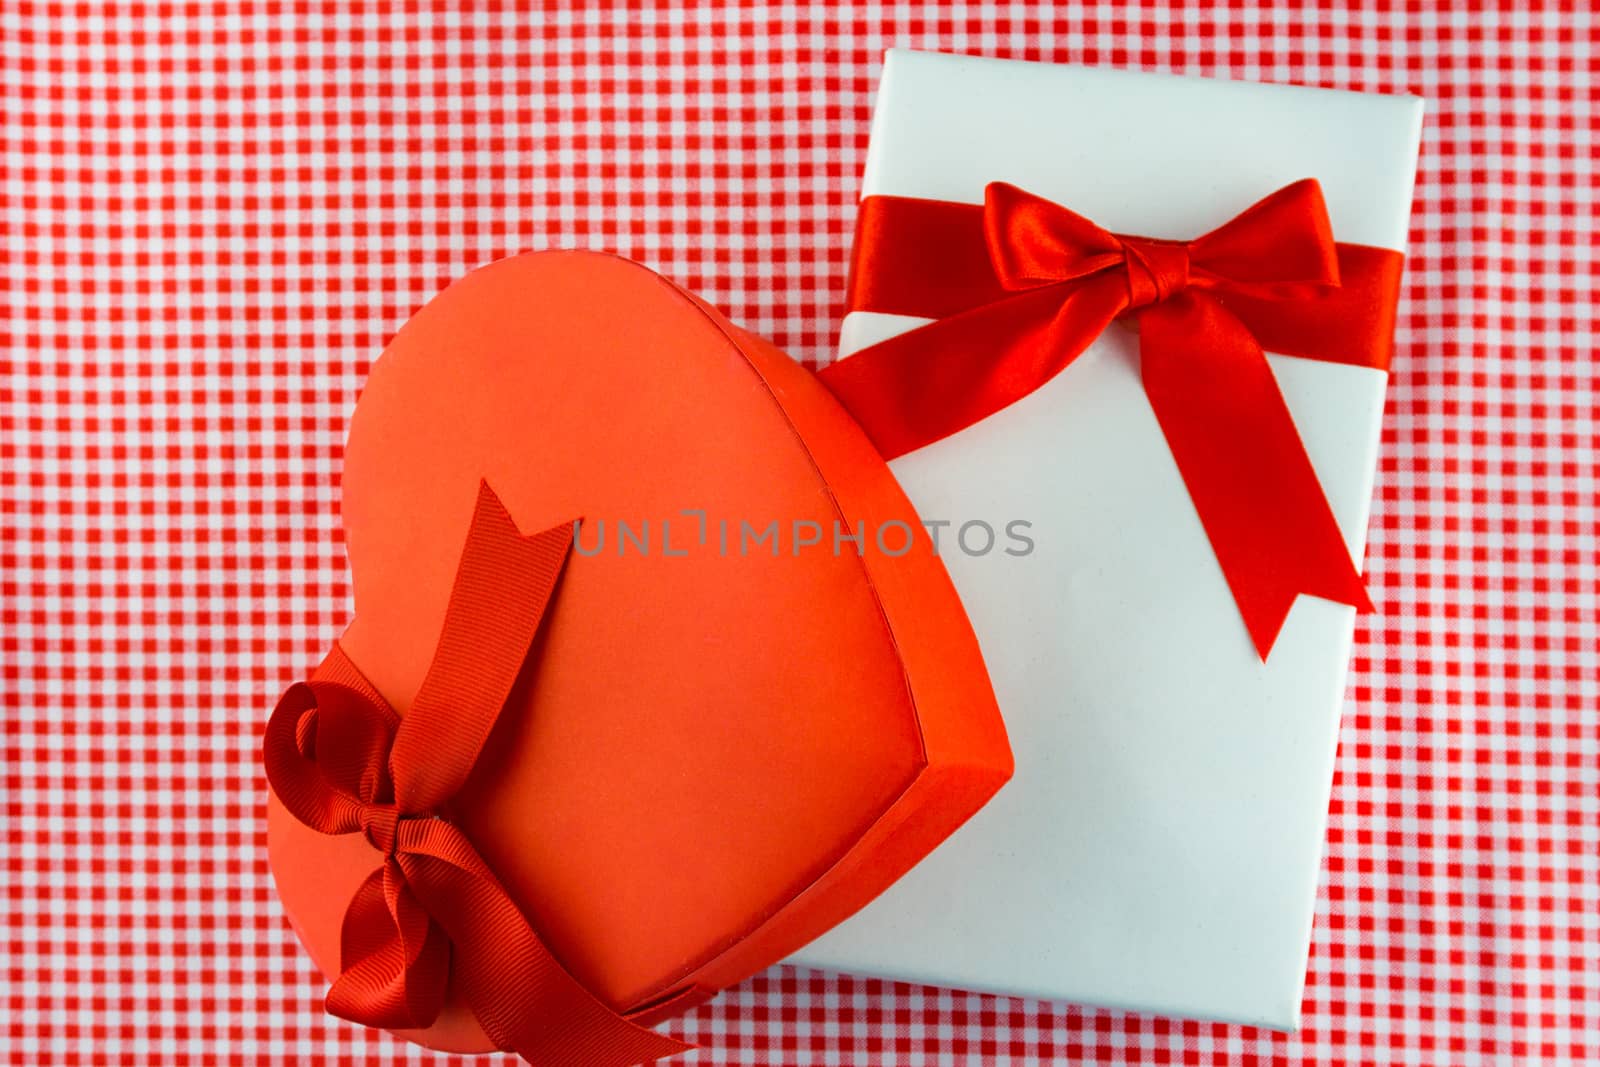 Valentines gift box with a red bow on red background Image of Va by nopparats